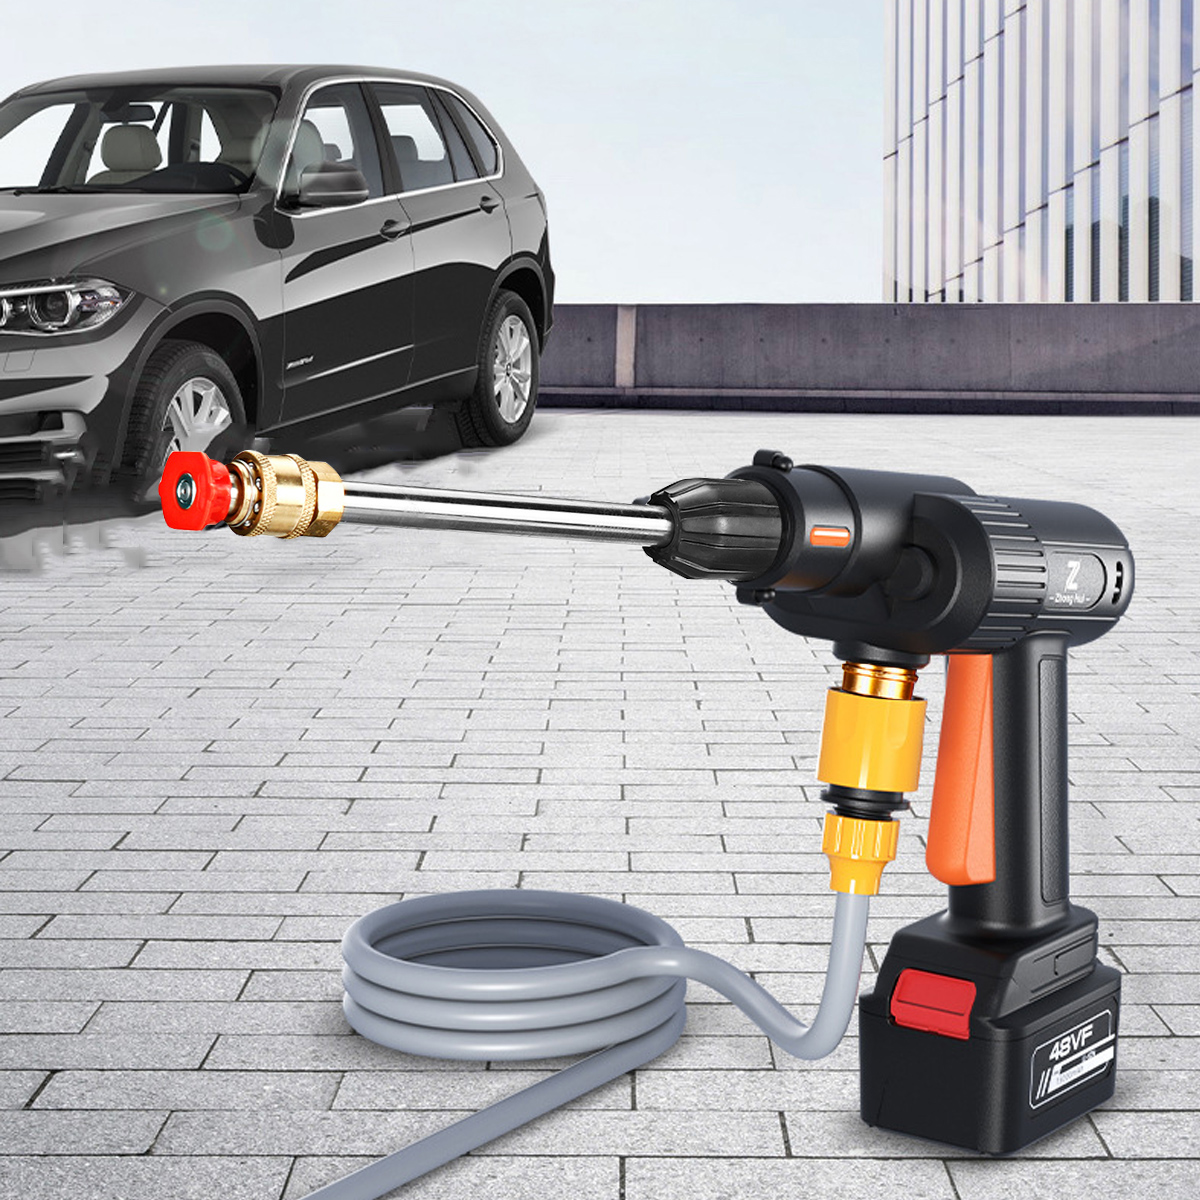 24V-Wireless-Car-Waher-10000mAH-With-Battery-Indicator-Electric-High-Pressure-Washer-Car-Washing-Mac-1856695-1